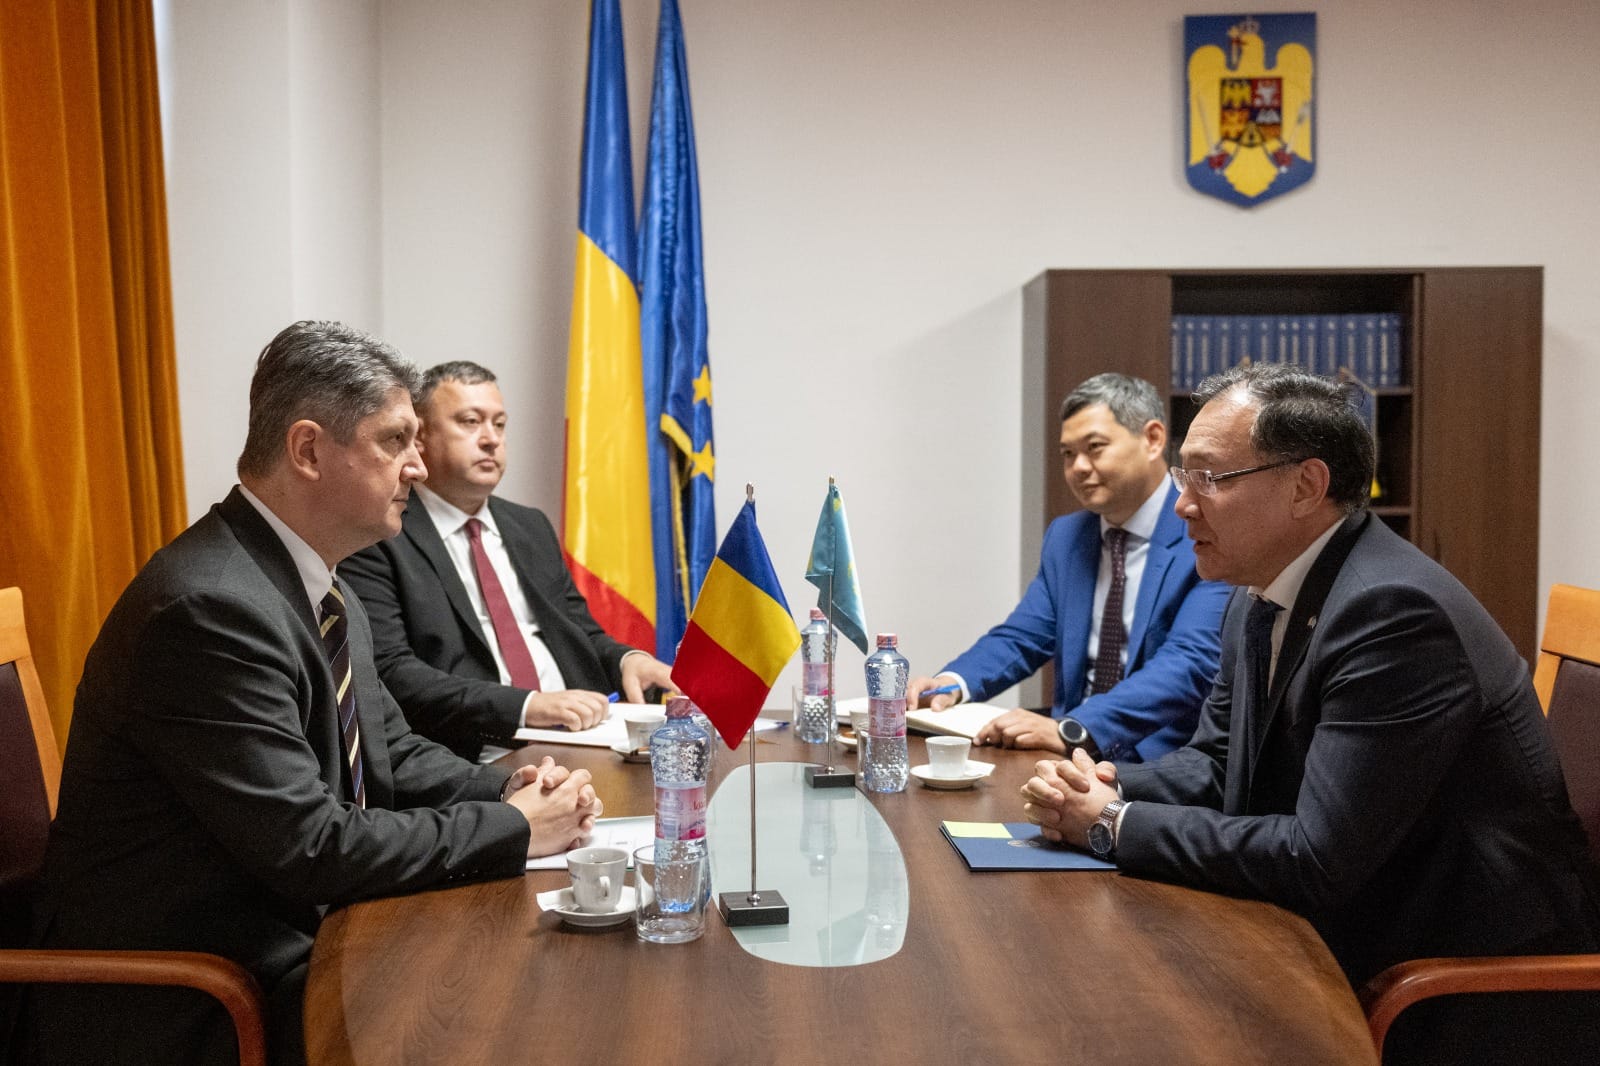 Development of Inter-parliamentary Relations is an Important Item on the Kazakh-Romanian Agenda